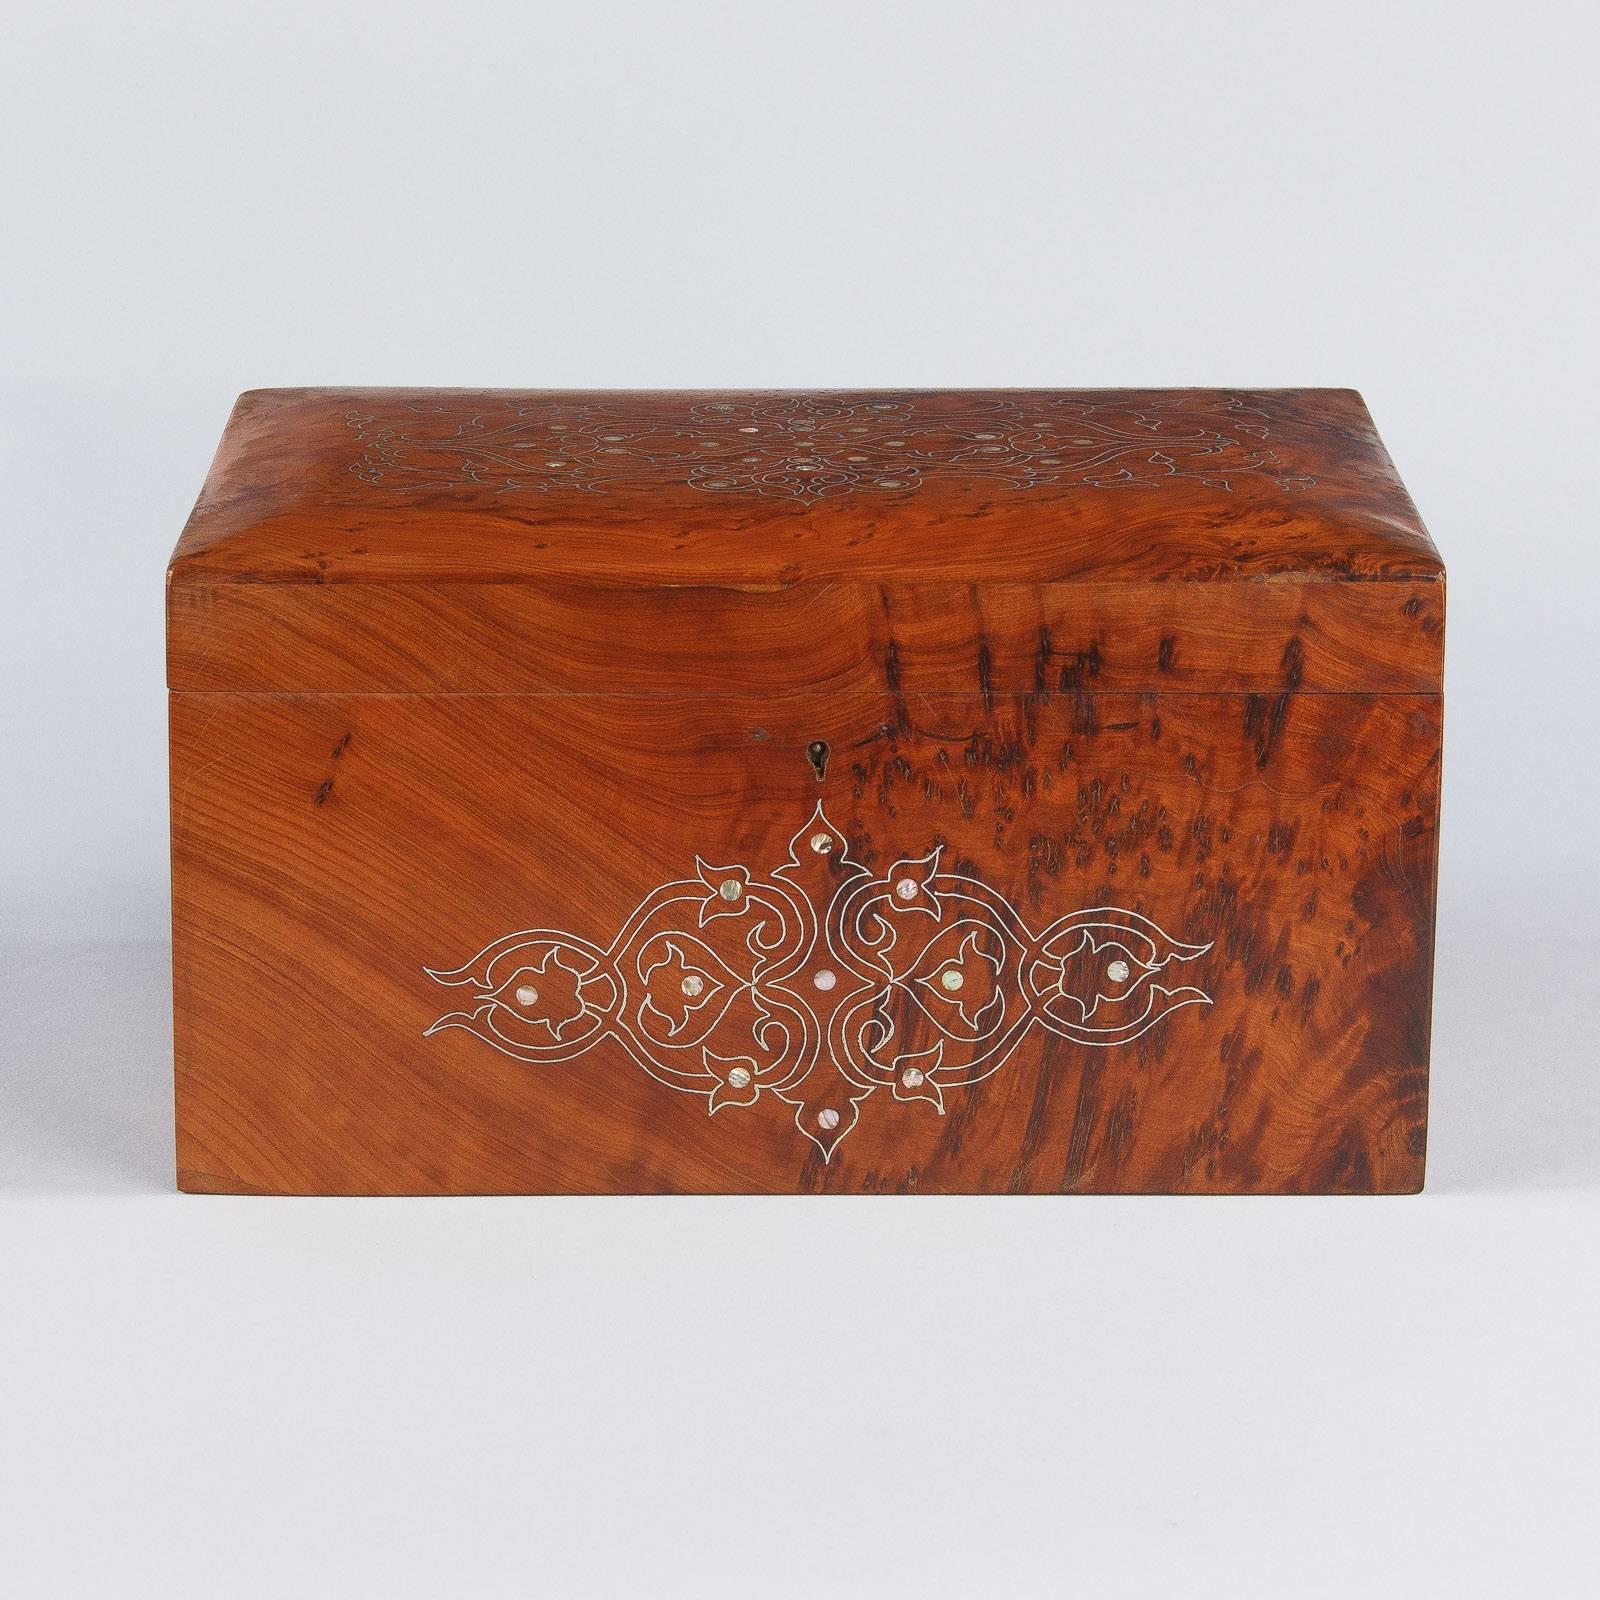 A gorgeous Charles X period jewelry box made of burl elmwood with mother-of-pearl marquetry inlay in arabesque shapes. The inside has a removable tray with three compartments. The original working key is included.